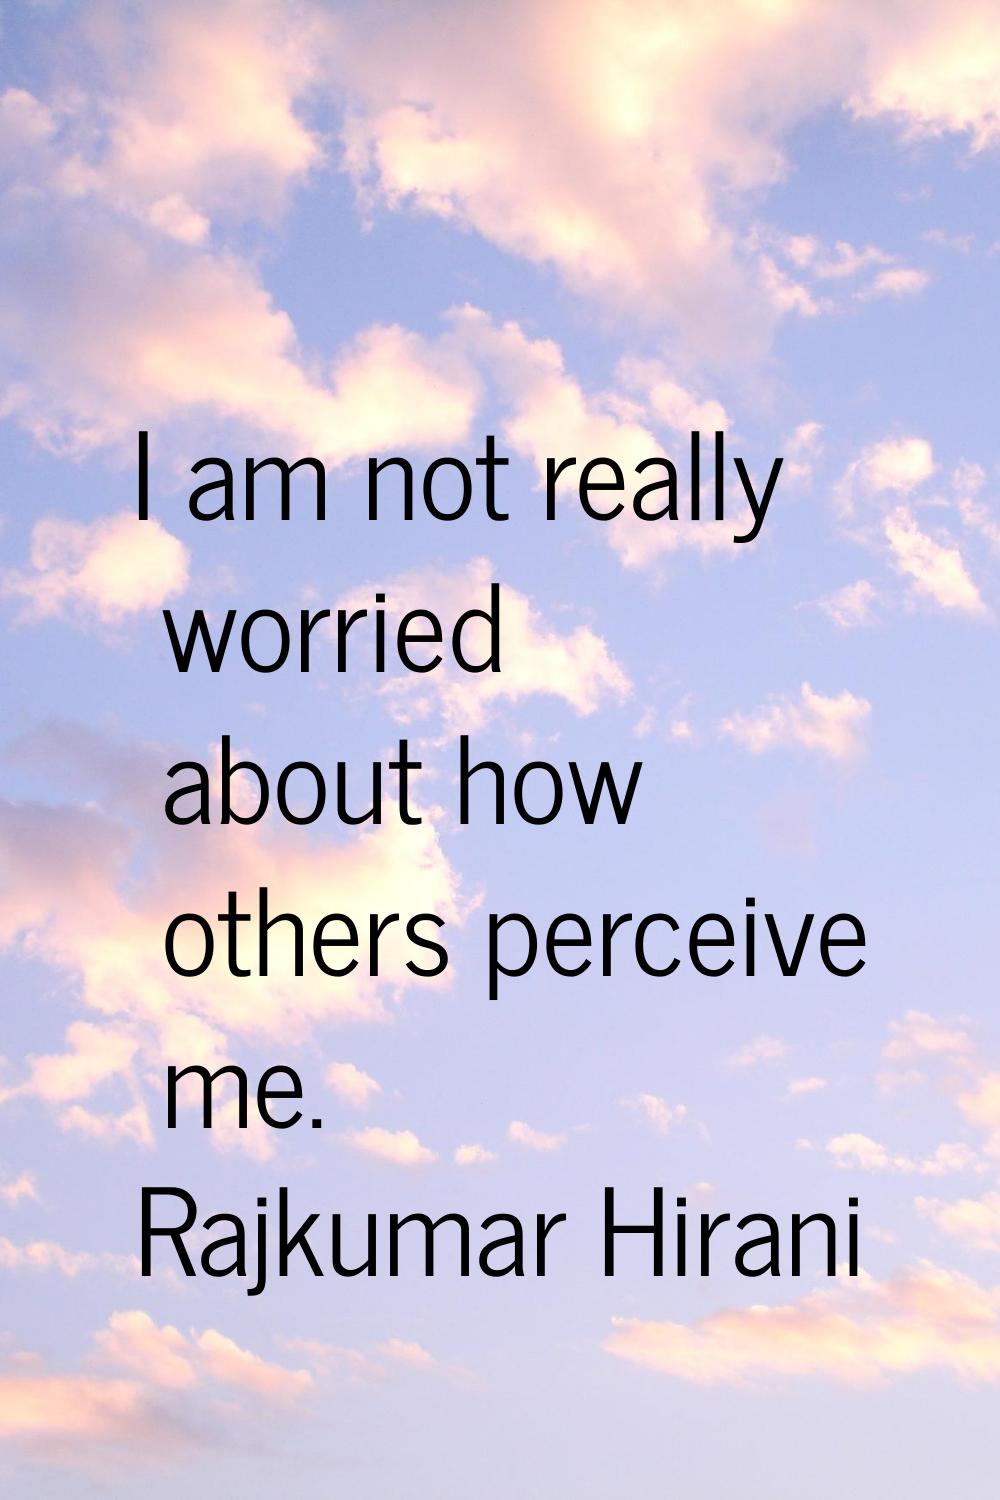 I am not really worried about how others perceive me.